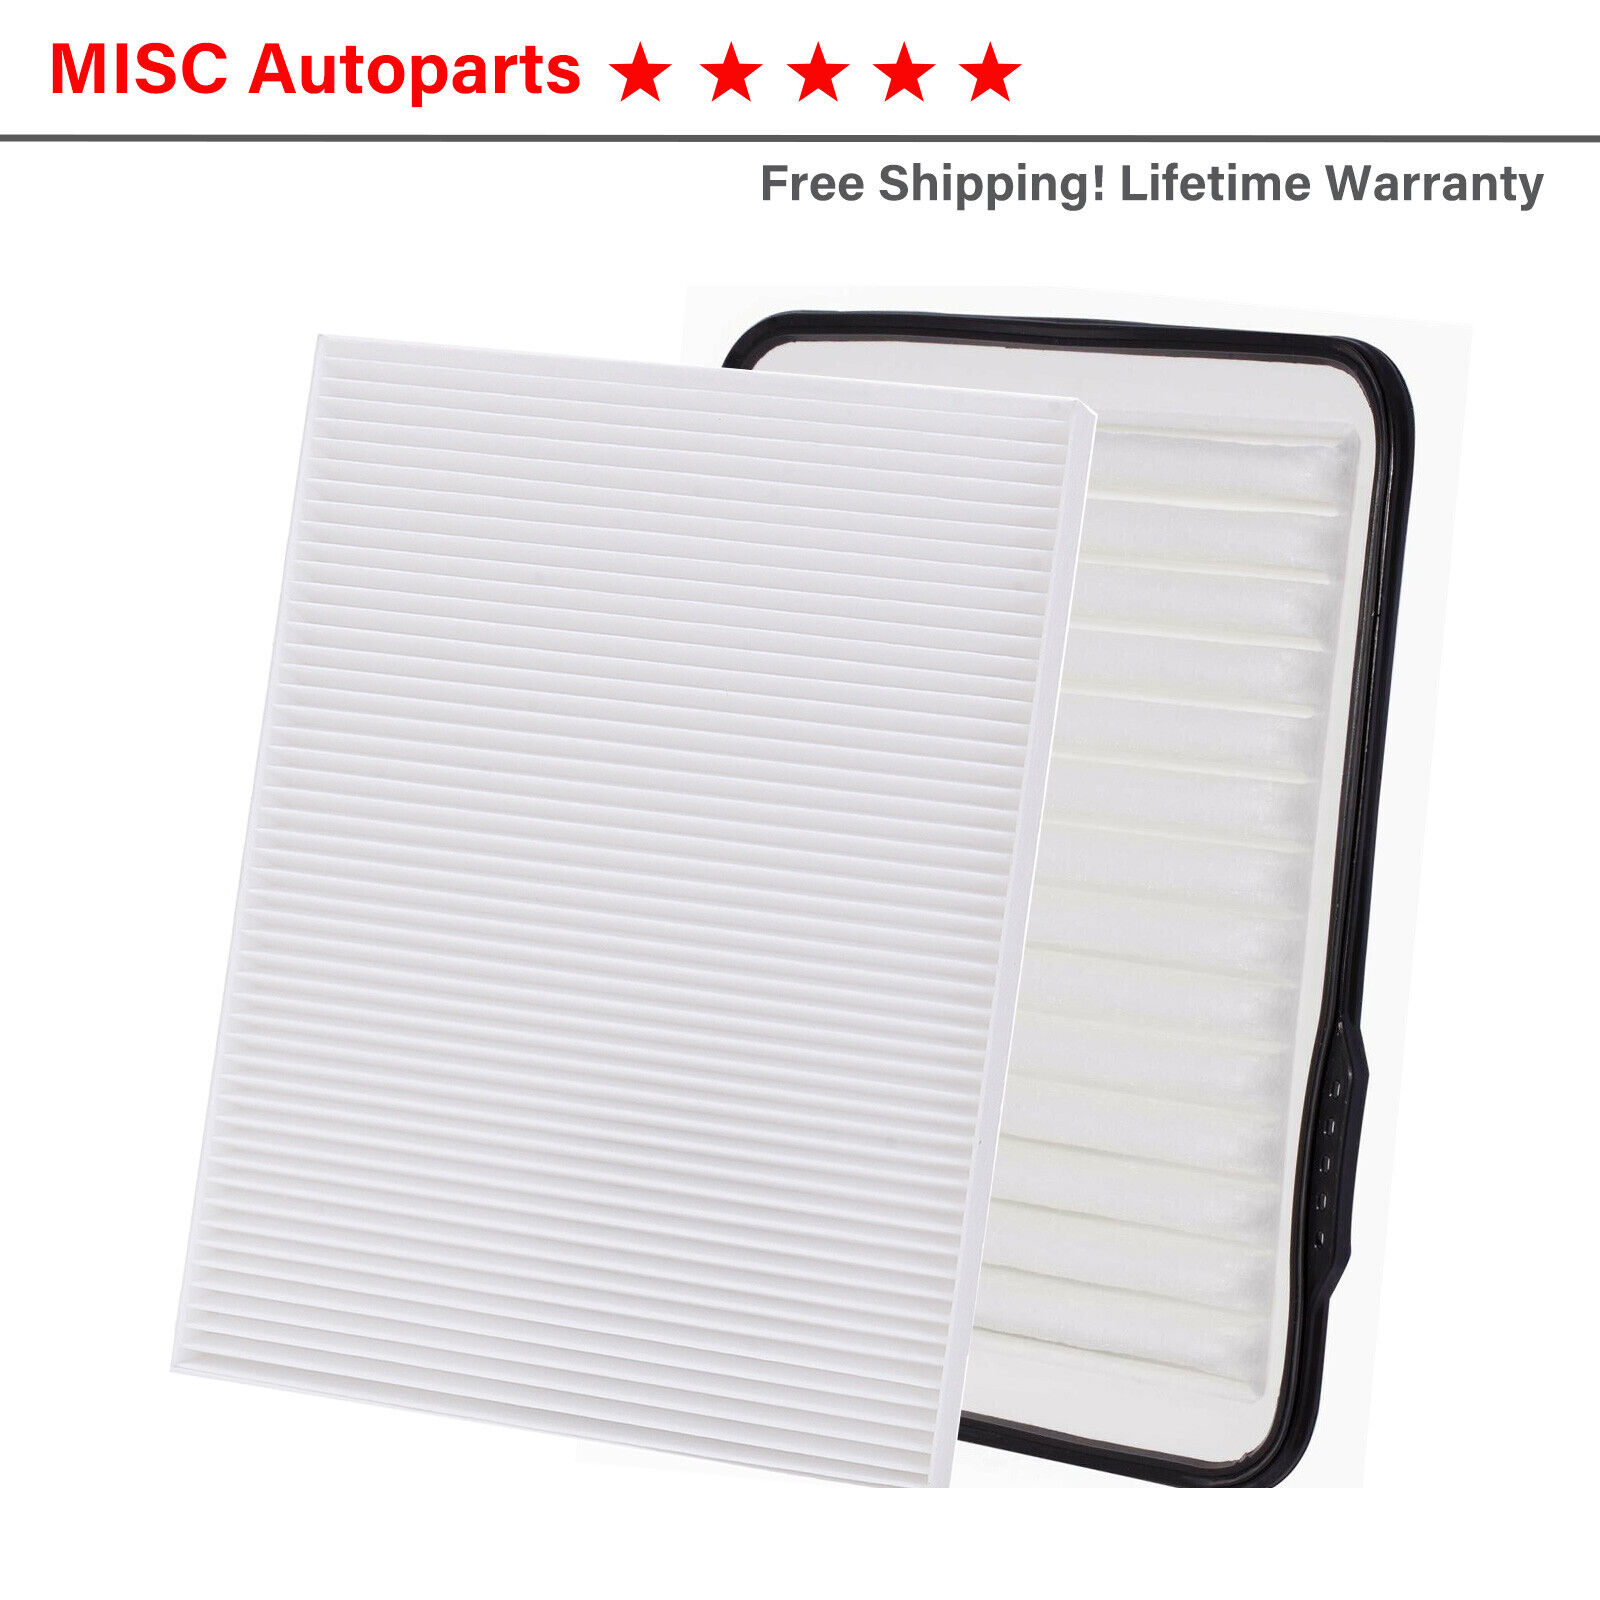 Engine & Cabin Air Filter For Buick Lucerne 2006-2011 Cadillac DTS